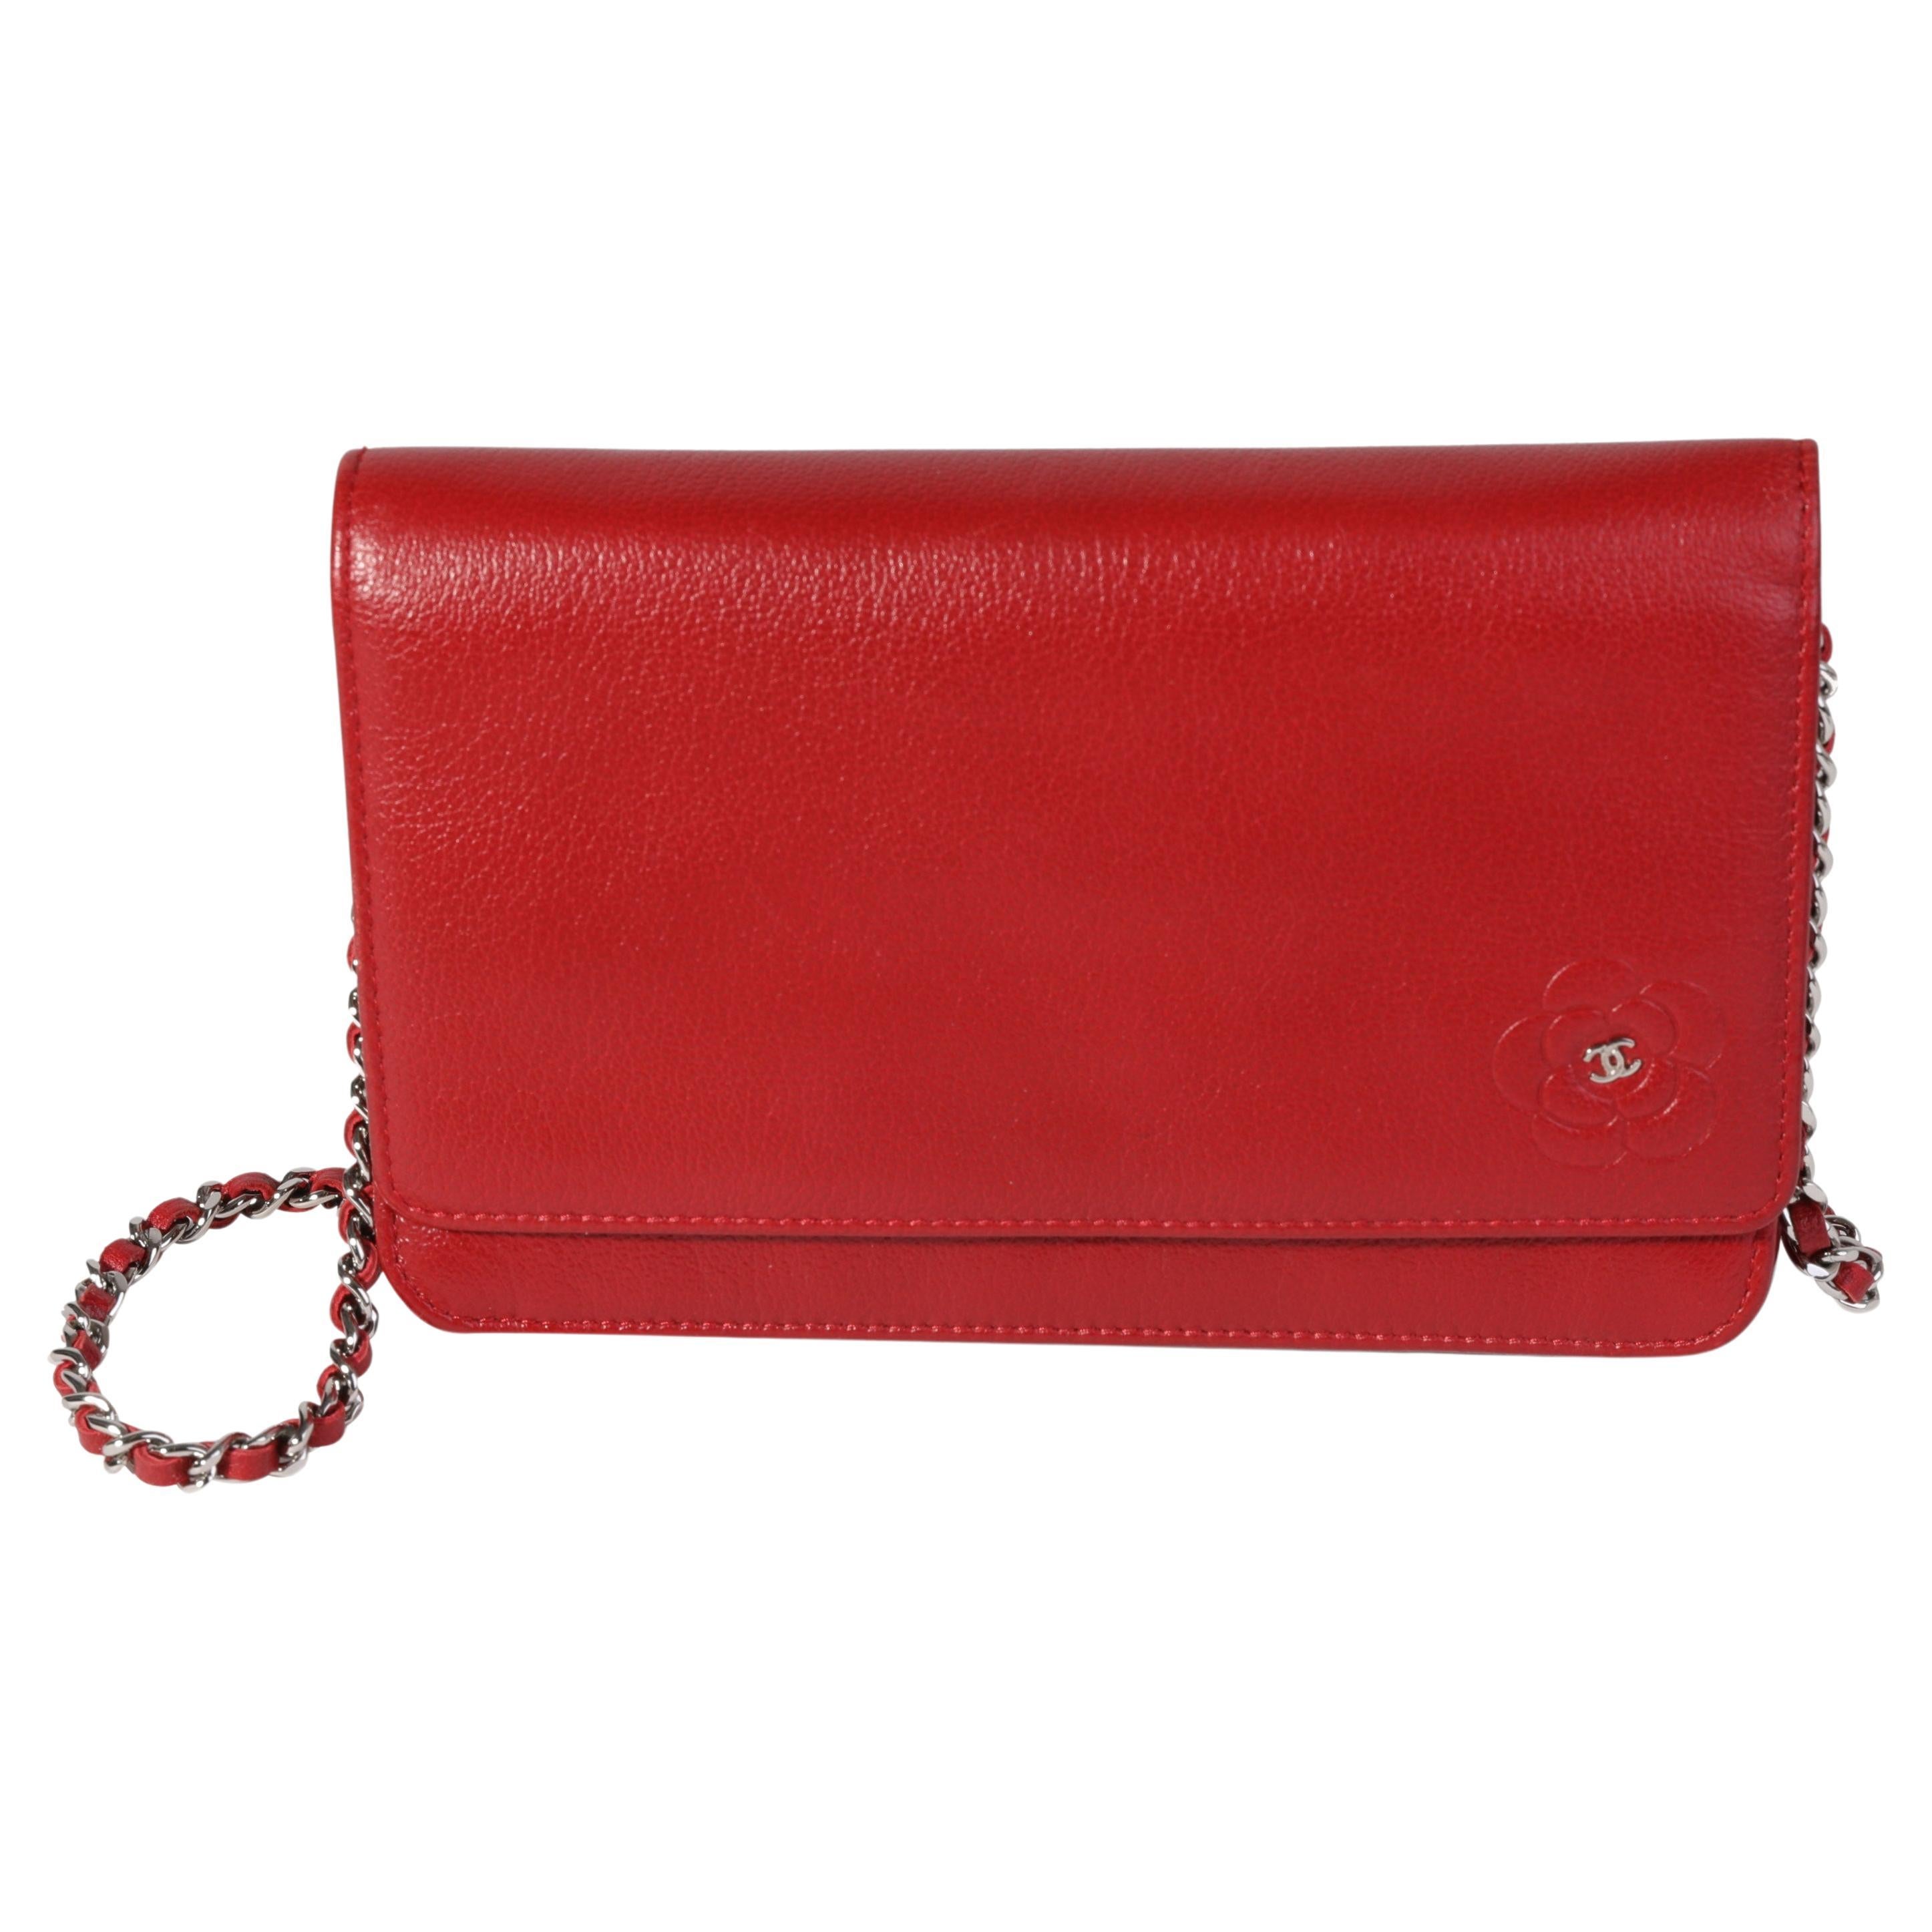 Chanel Red Grained Leather Camellia Wallet On Chain